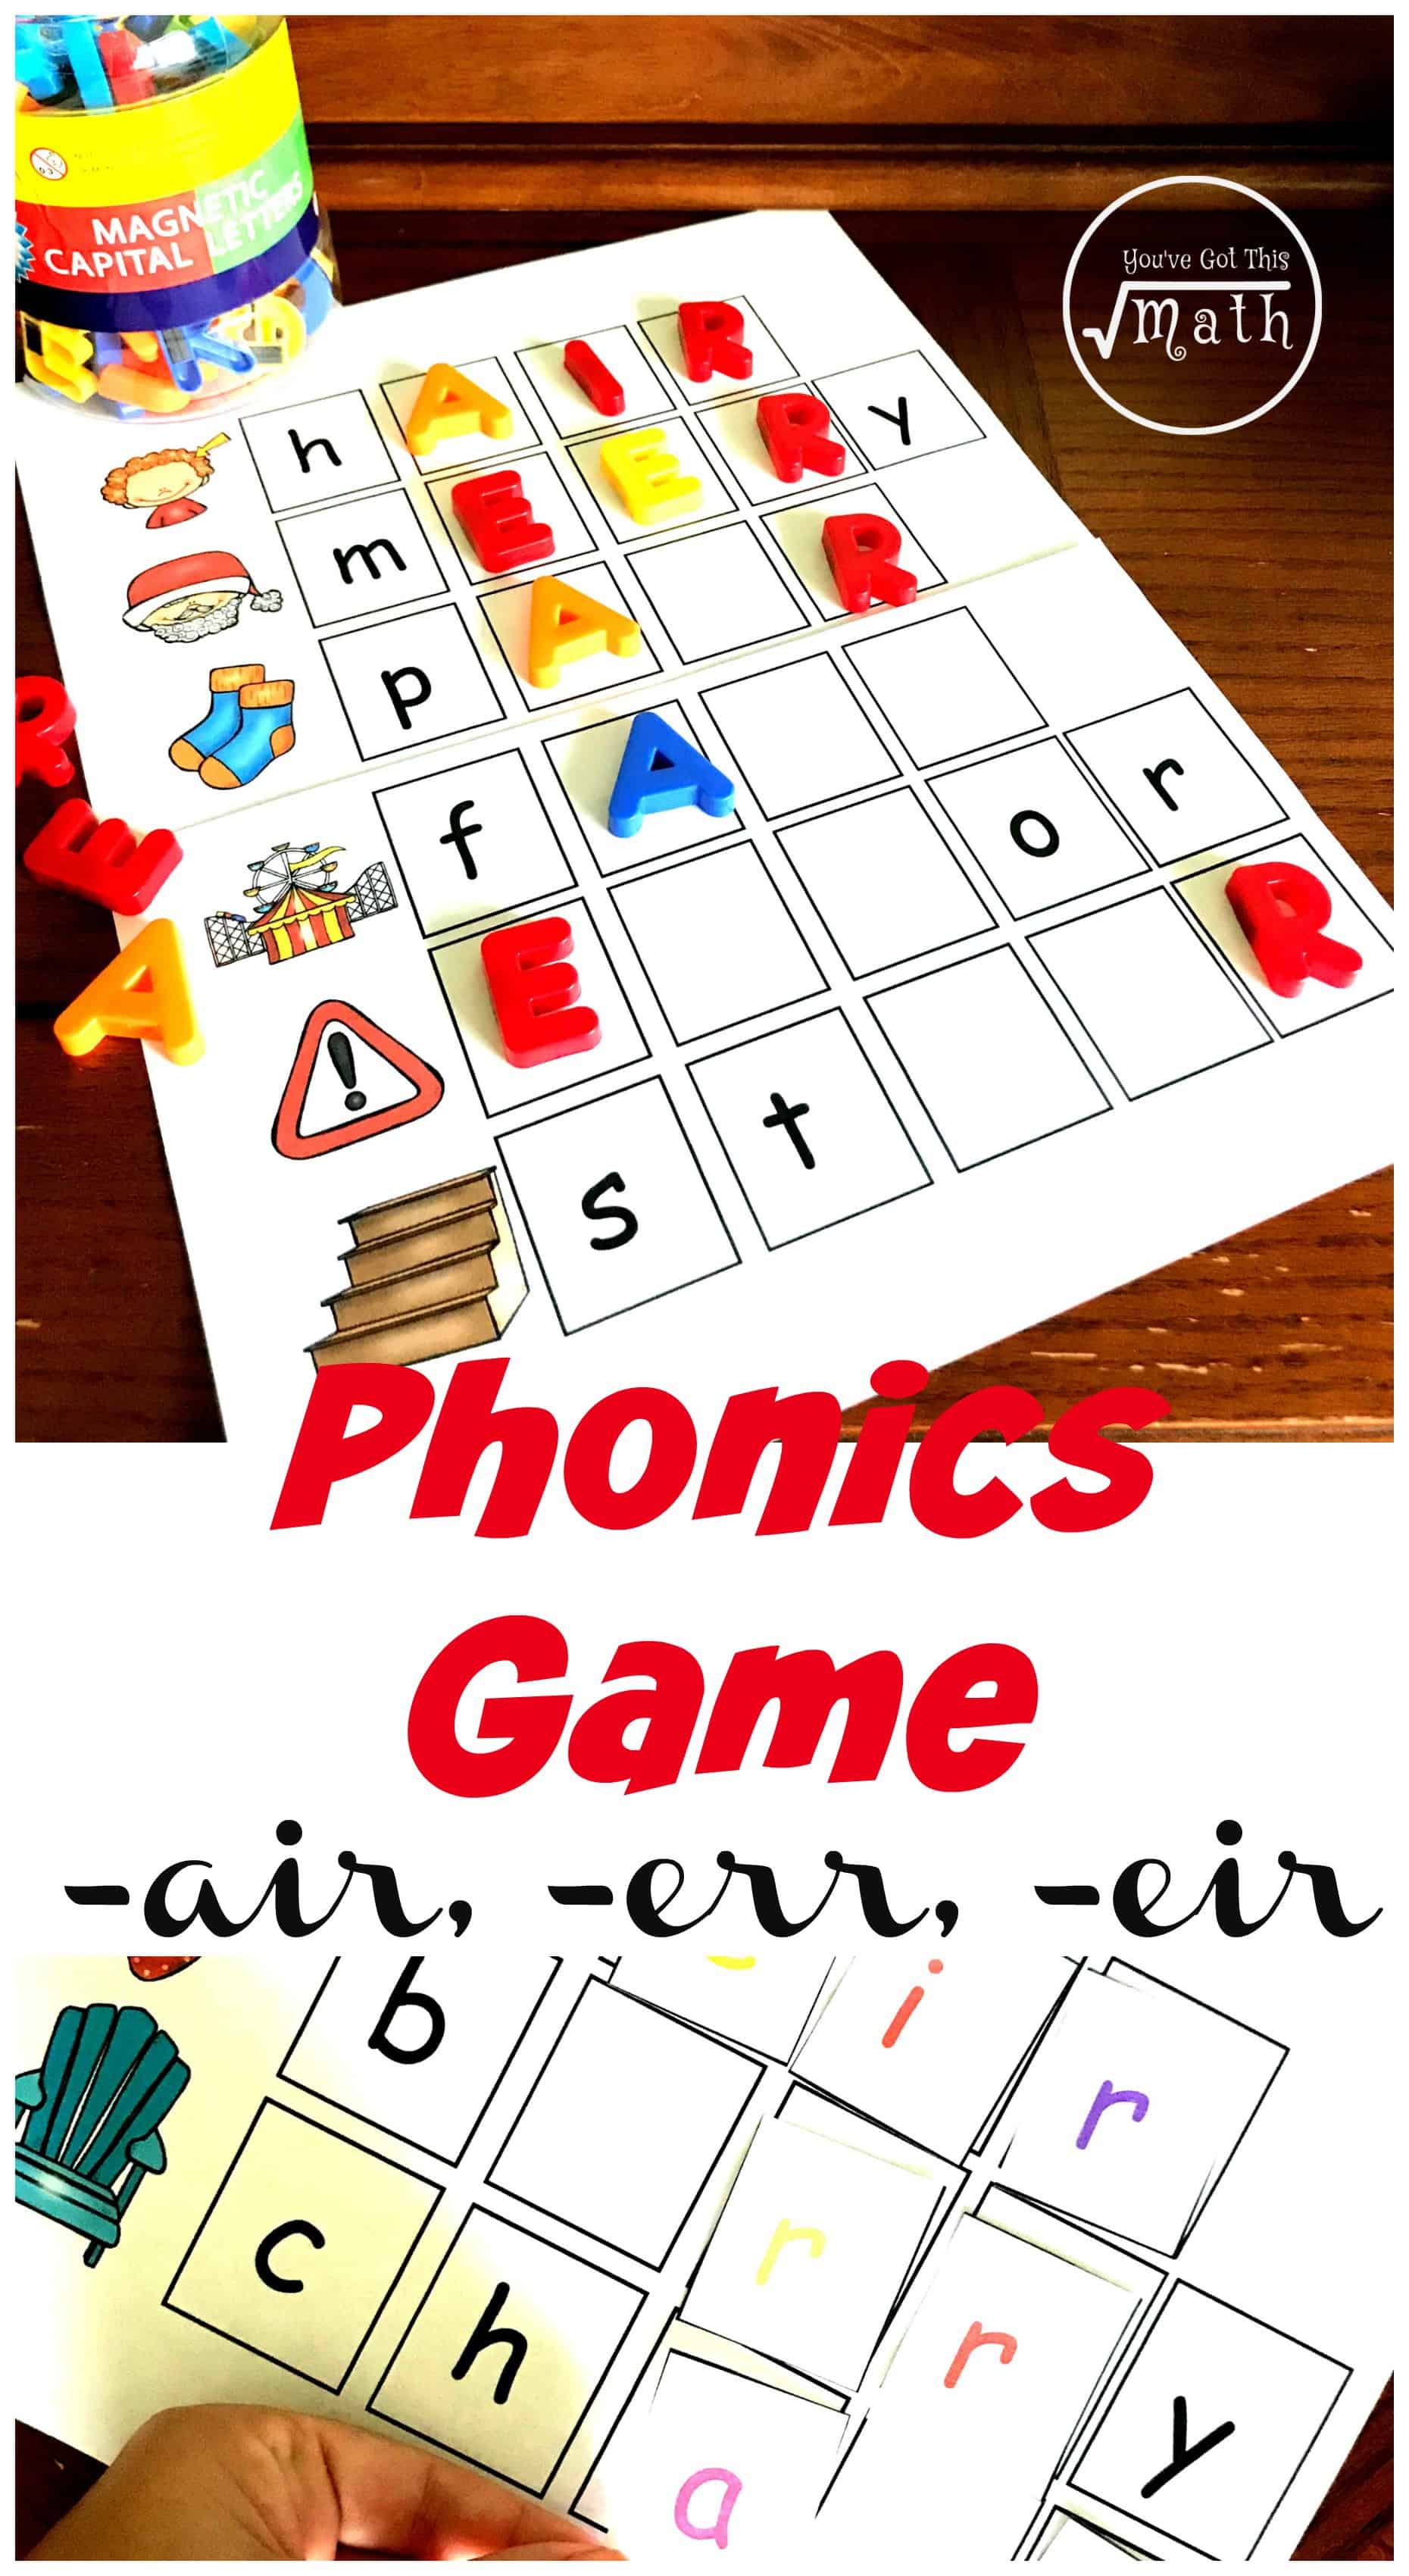 Air phonics game with colorful letters on a wooden background. 